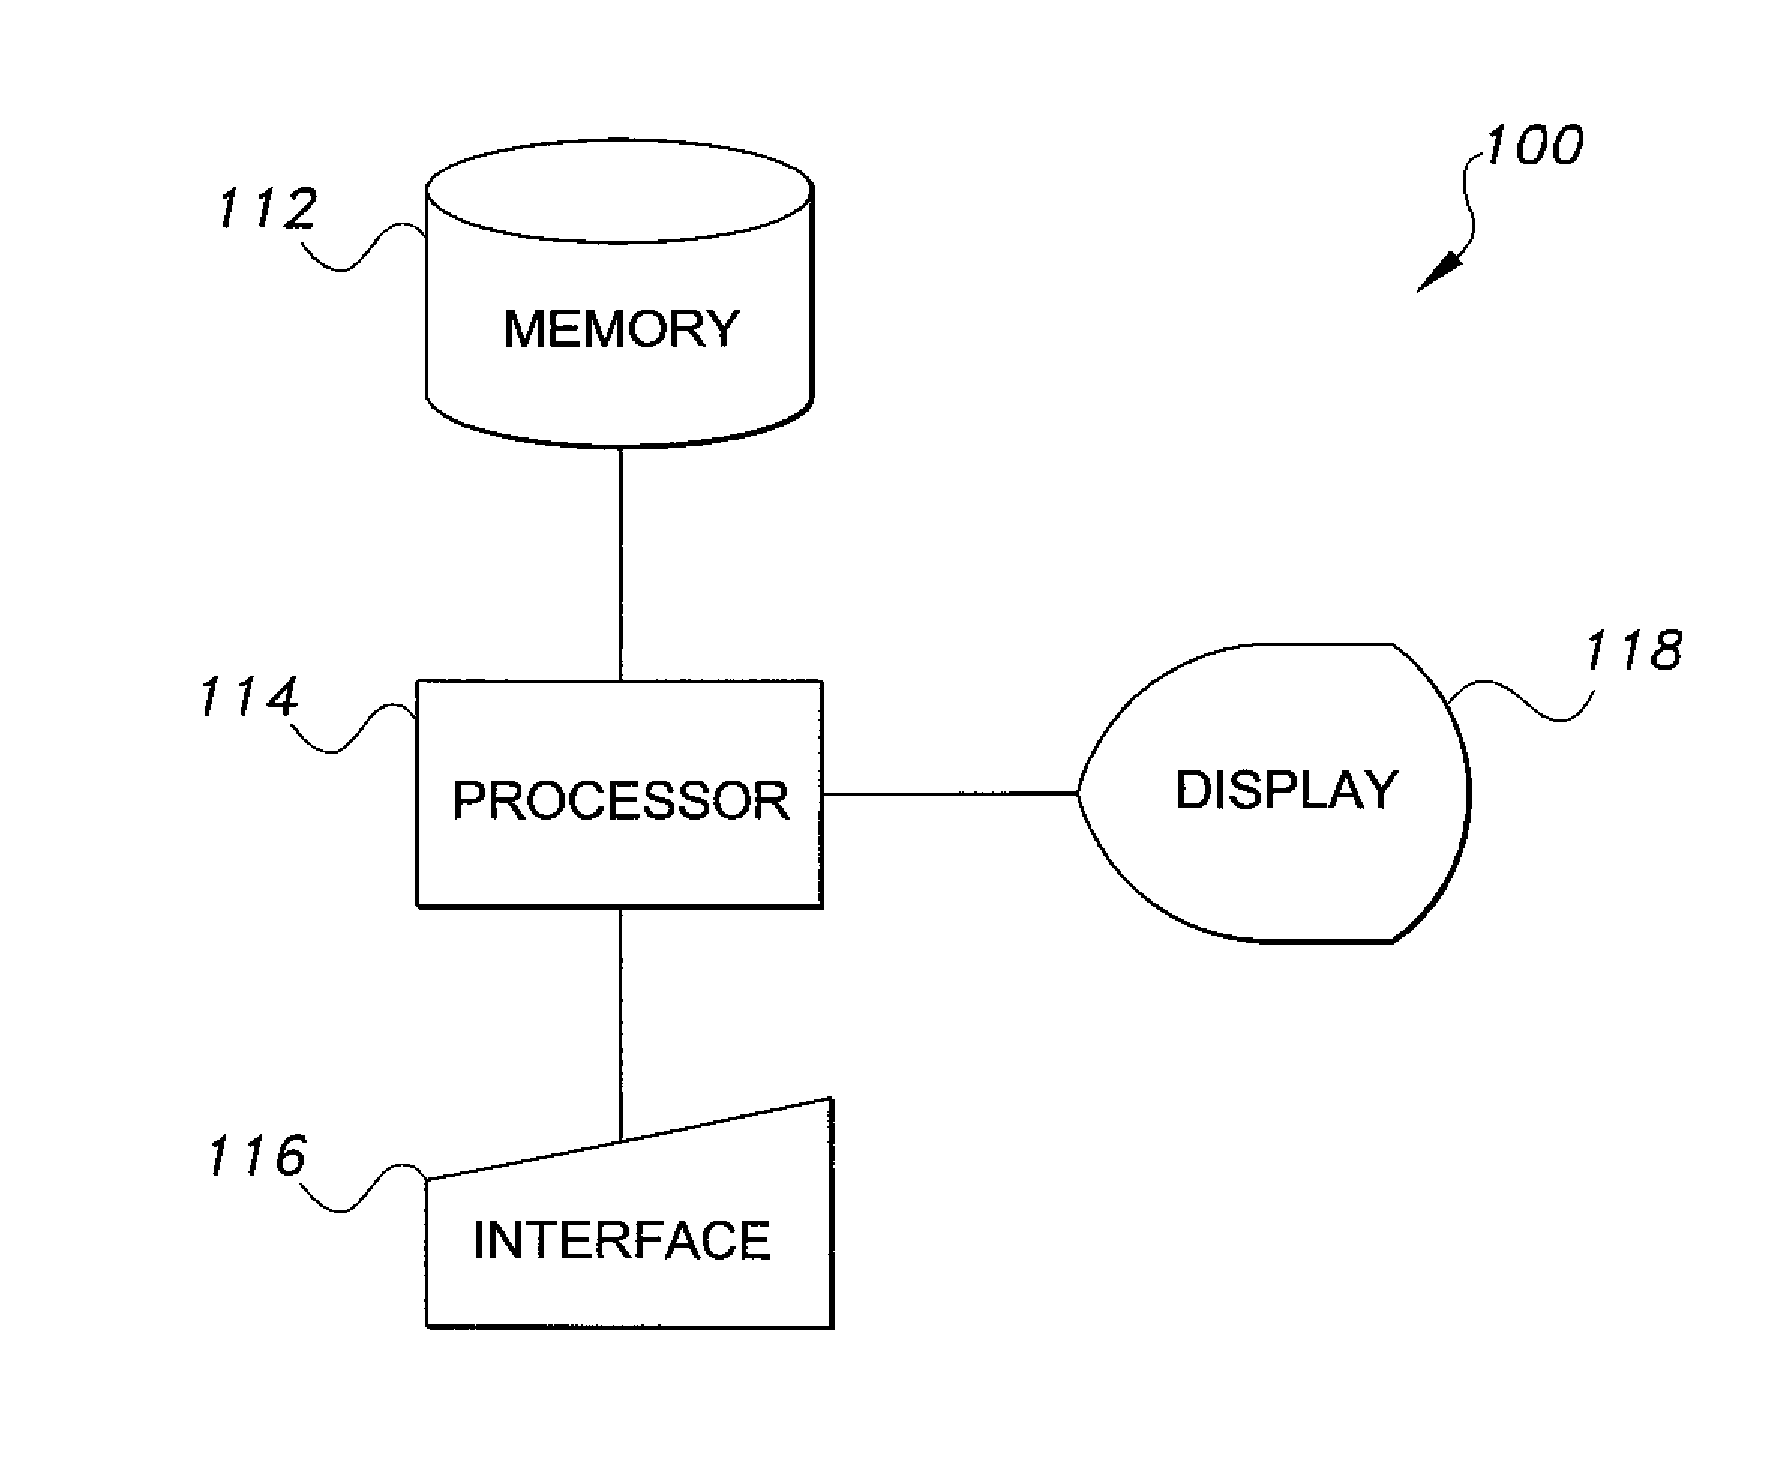 Method of performing structure-based bayesian sparse signal reconstruction